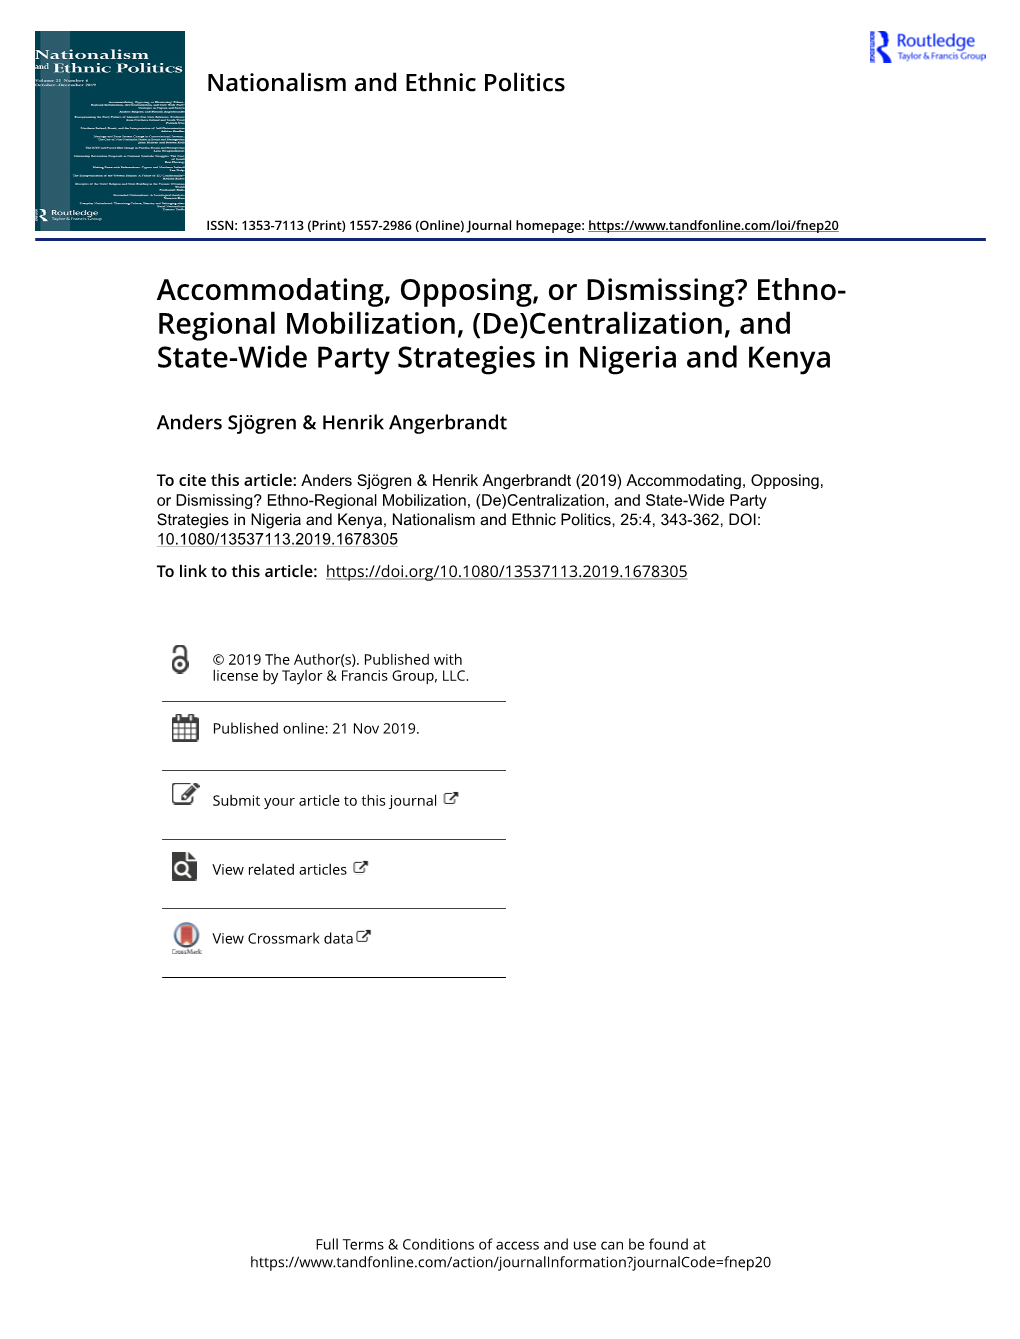 Ethno- Regional Mobilization, (De)Centralization, and State-Wide Party Strategies in Nigeria and Kenya